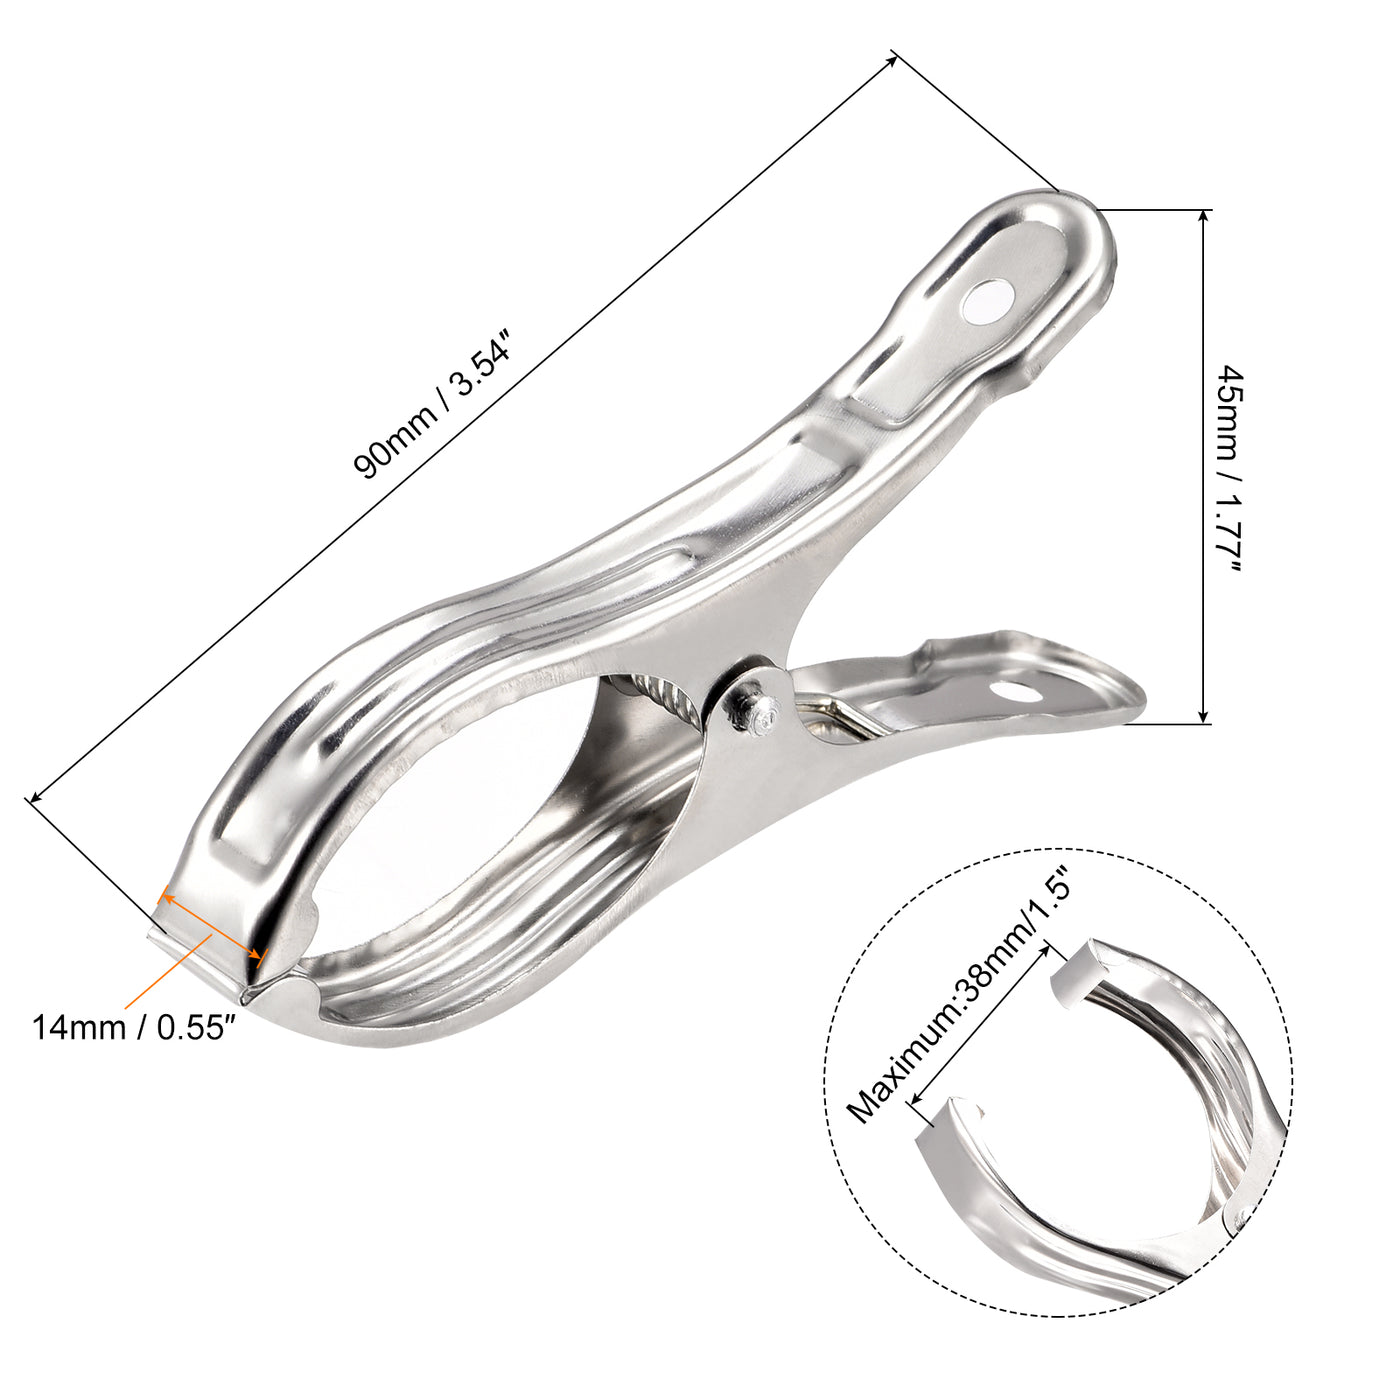 uxcell Uxcell Tablecloth Clips - 90mm Stainless Steel Clamps for Fixing Table Cloth Hanging Clothes, 4 Pcs